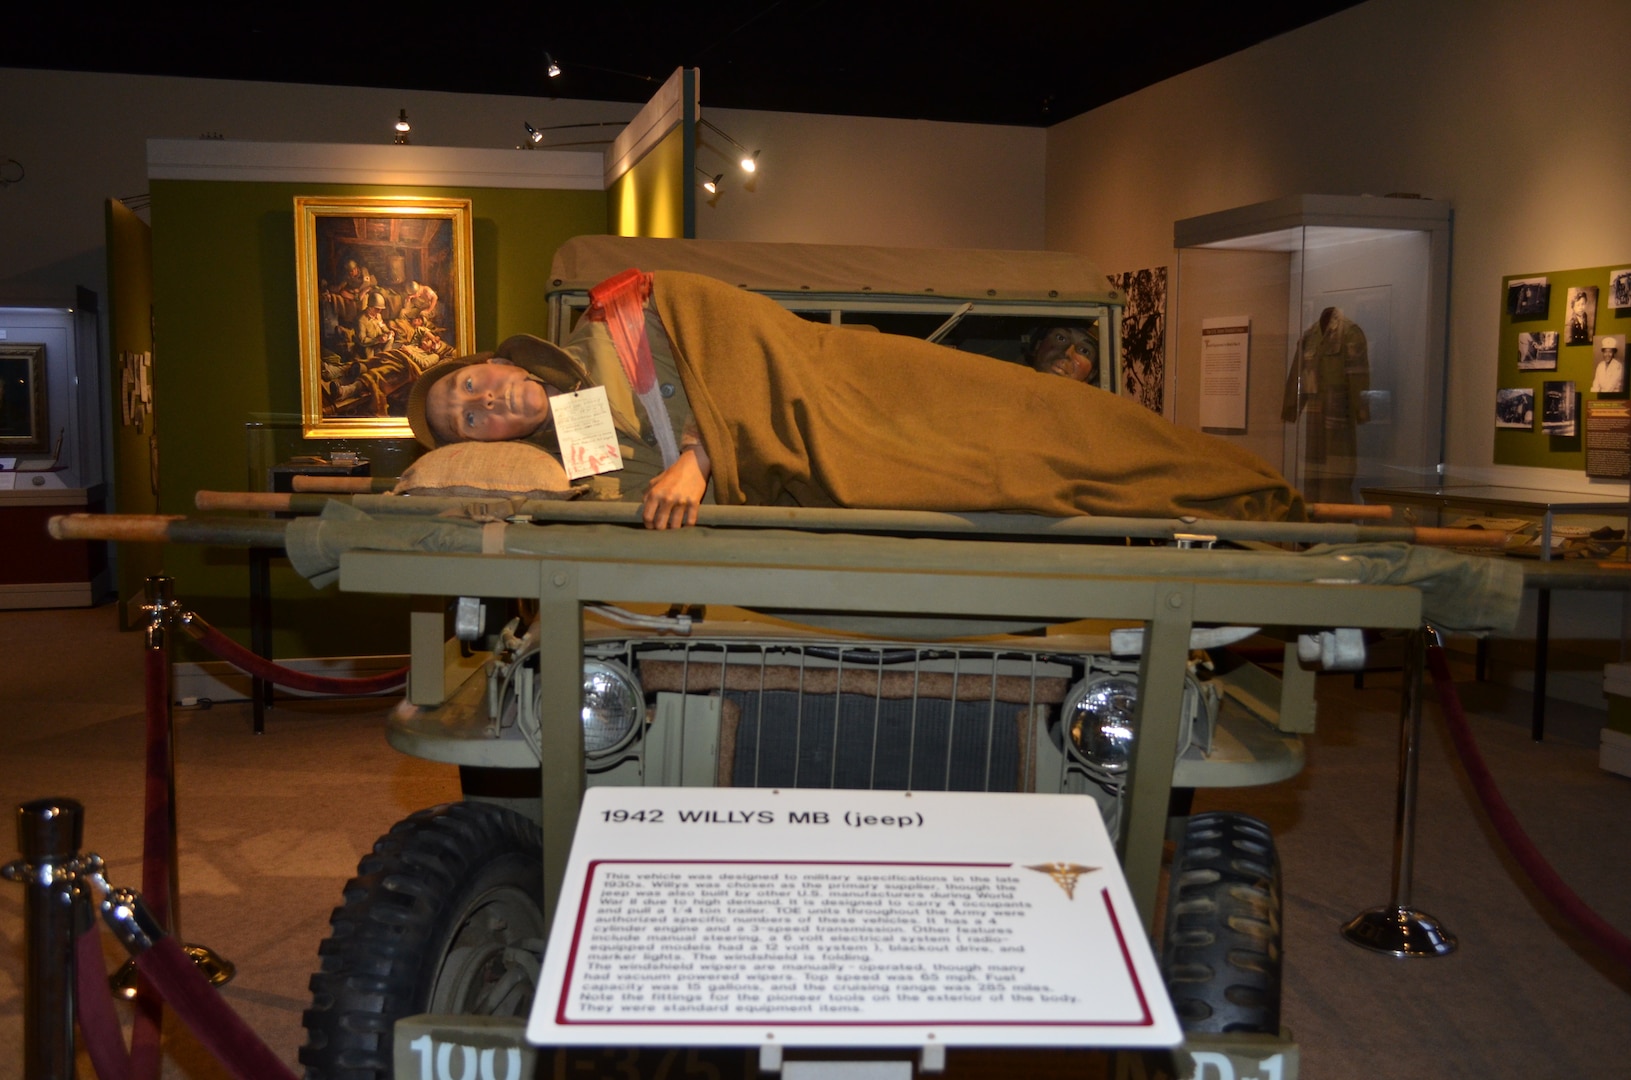 An exhibit depicting a wounded service member being evacuated on an improvised stretcher carrier bolted to a frame of a jeep during the Battle of the Bulge in 1945 is one of two new diorama displays at the U.S. Army Medical Department Museum at Joint Base San Antonio-Fort Sam Houston.